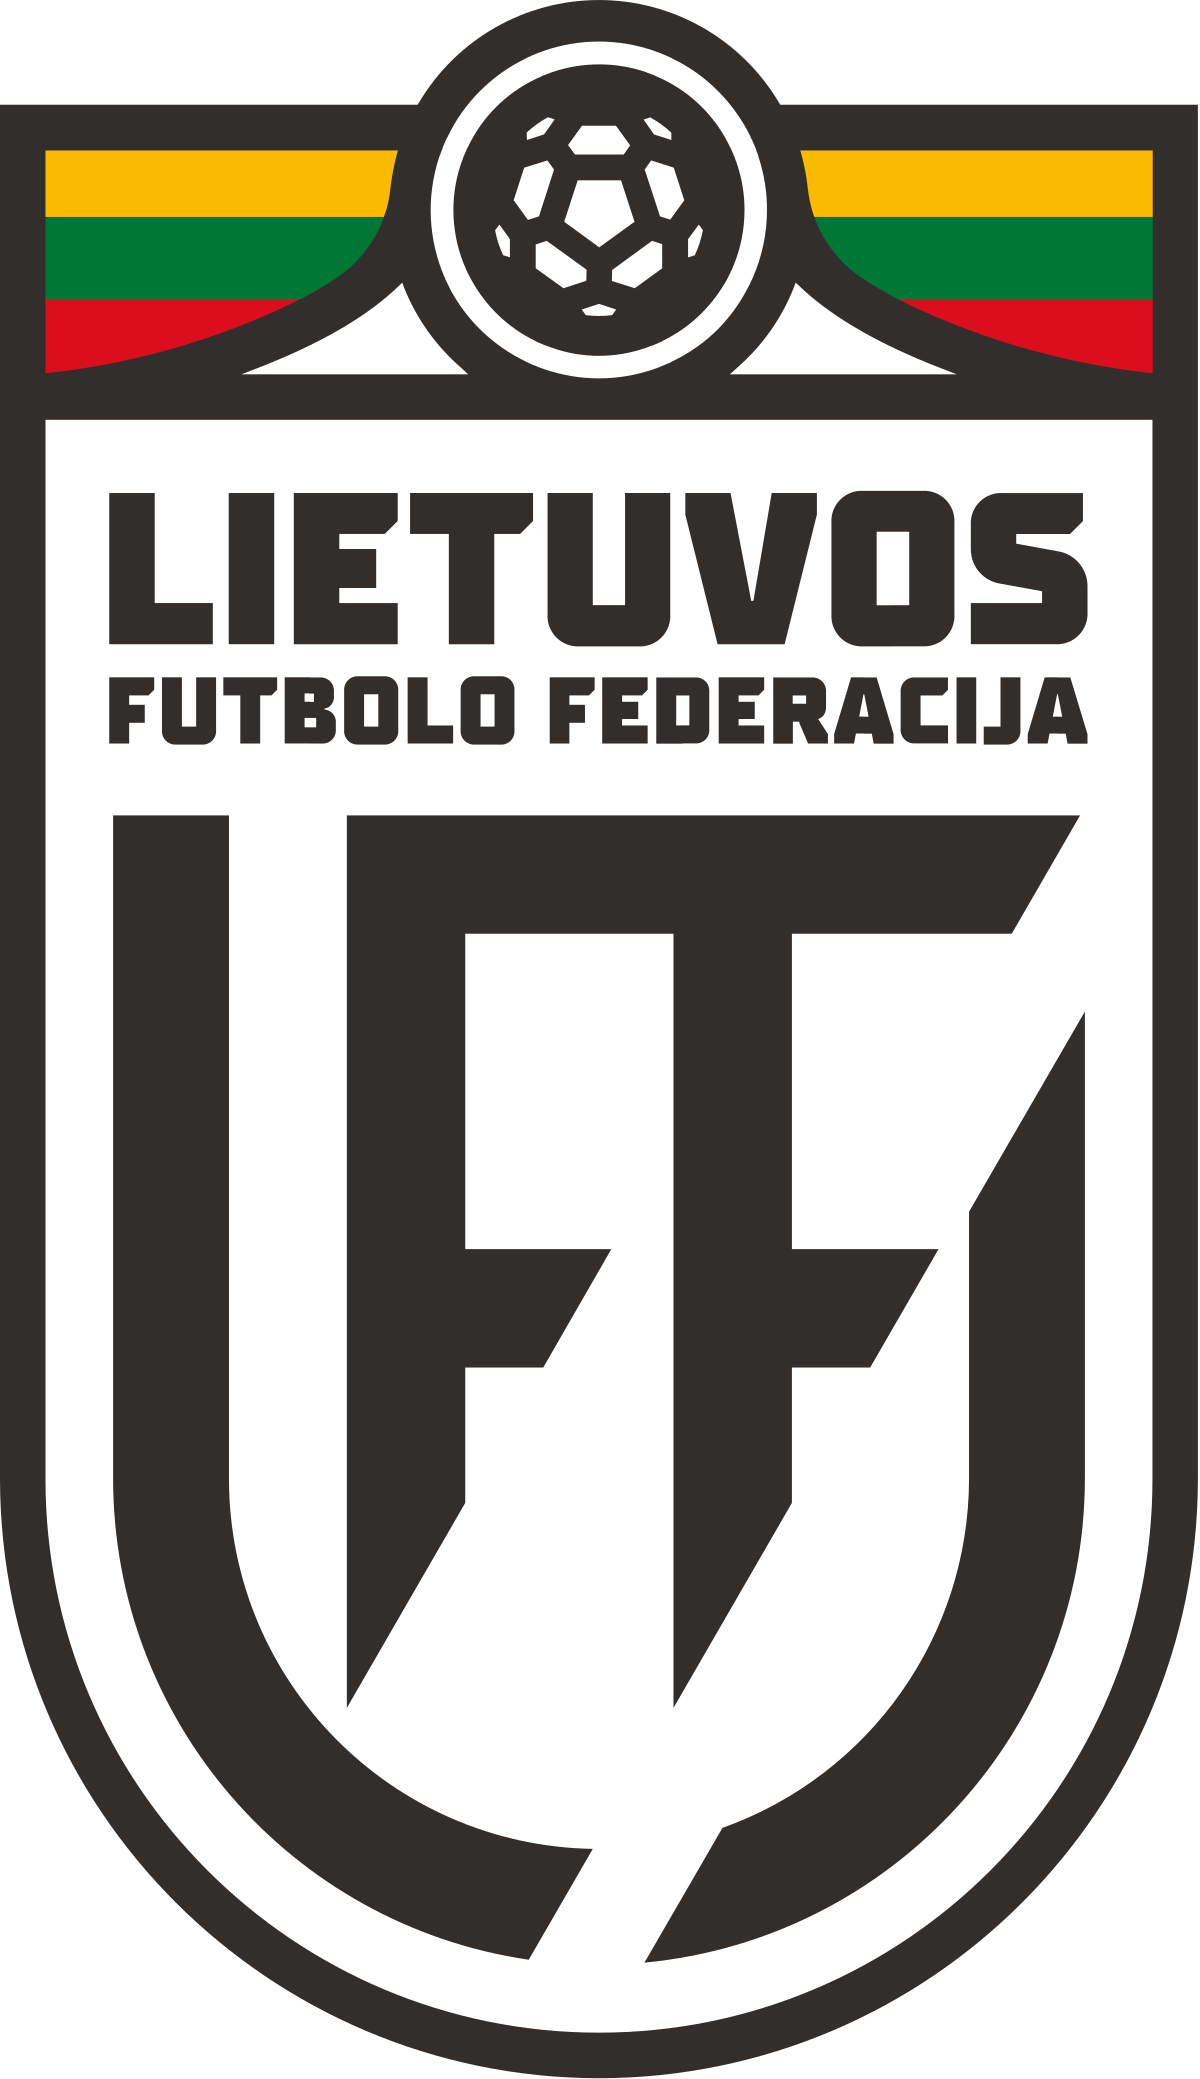 Lithuanian football federation logo in color on transparent background